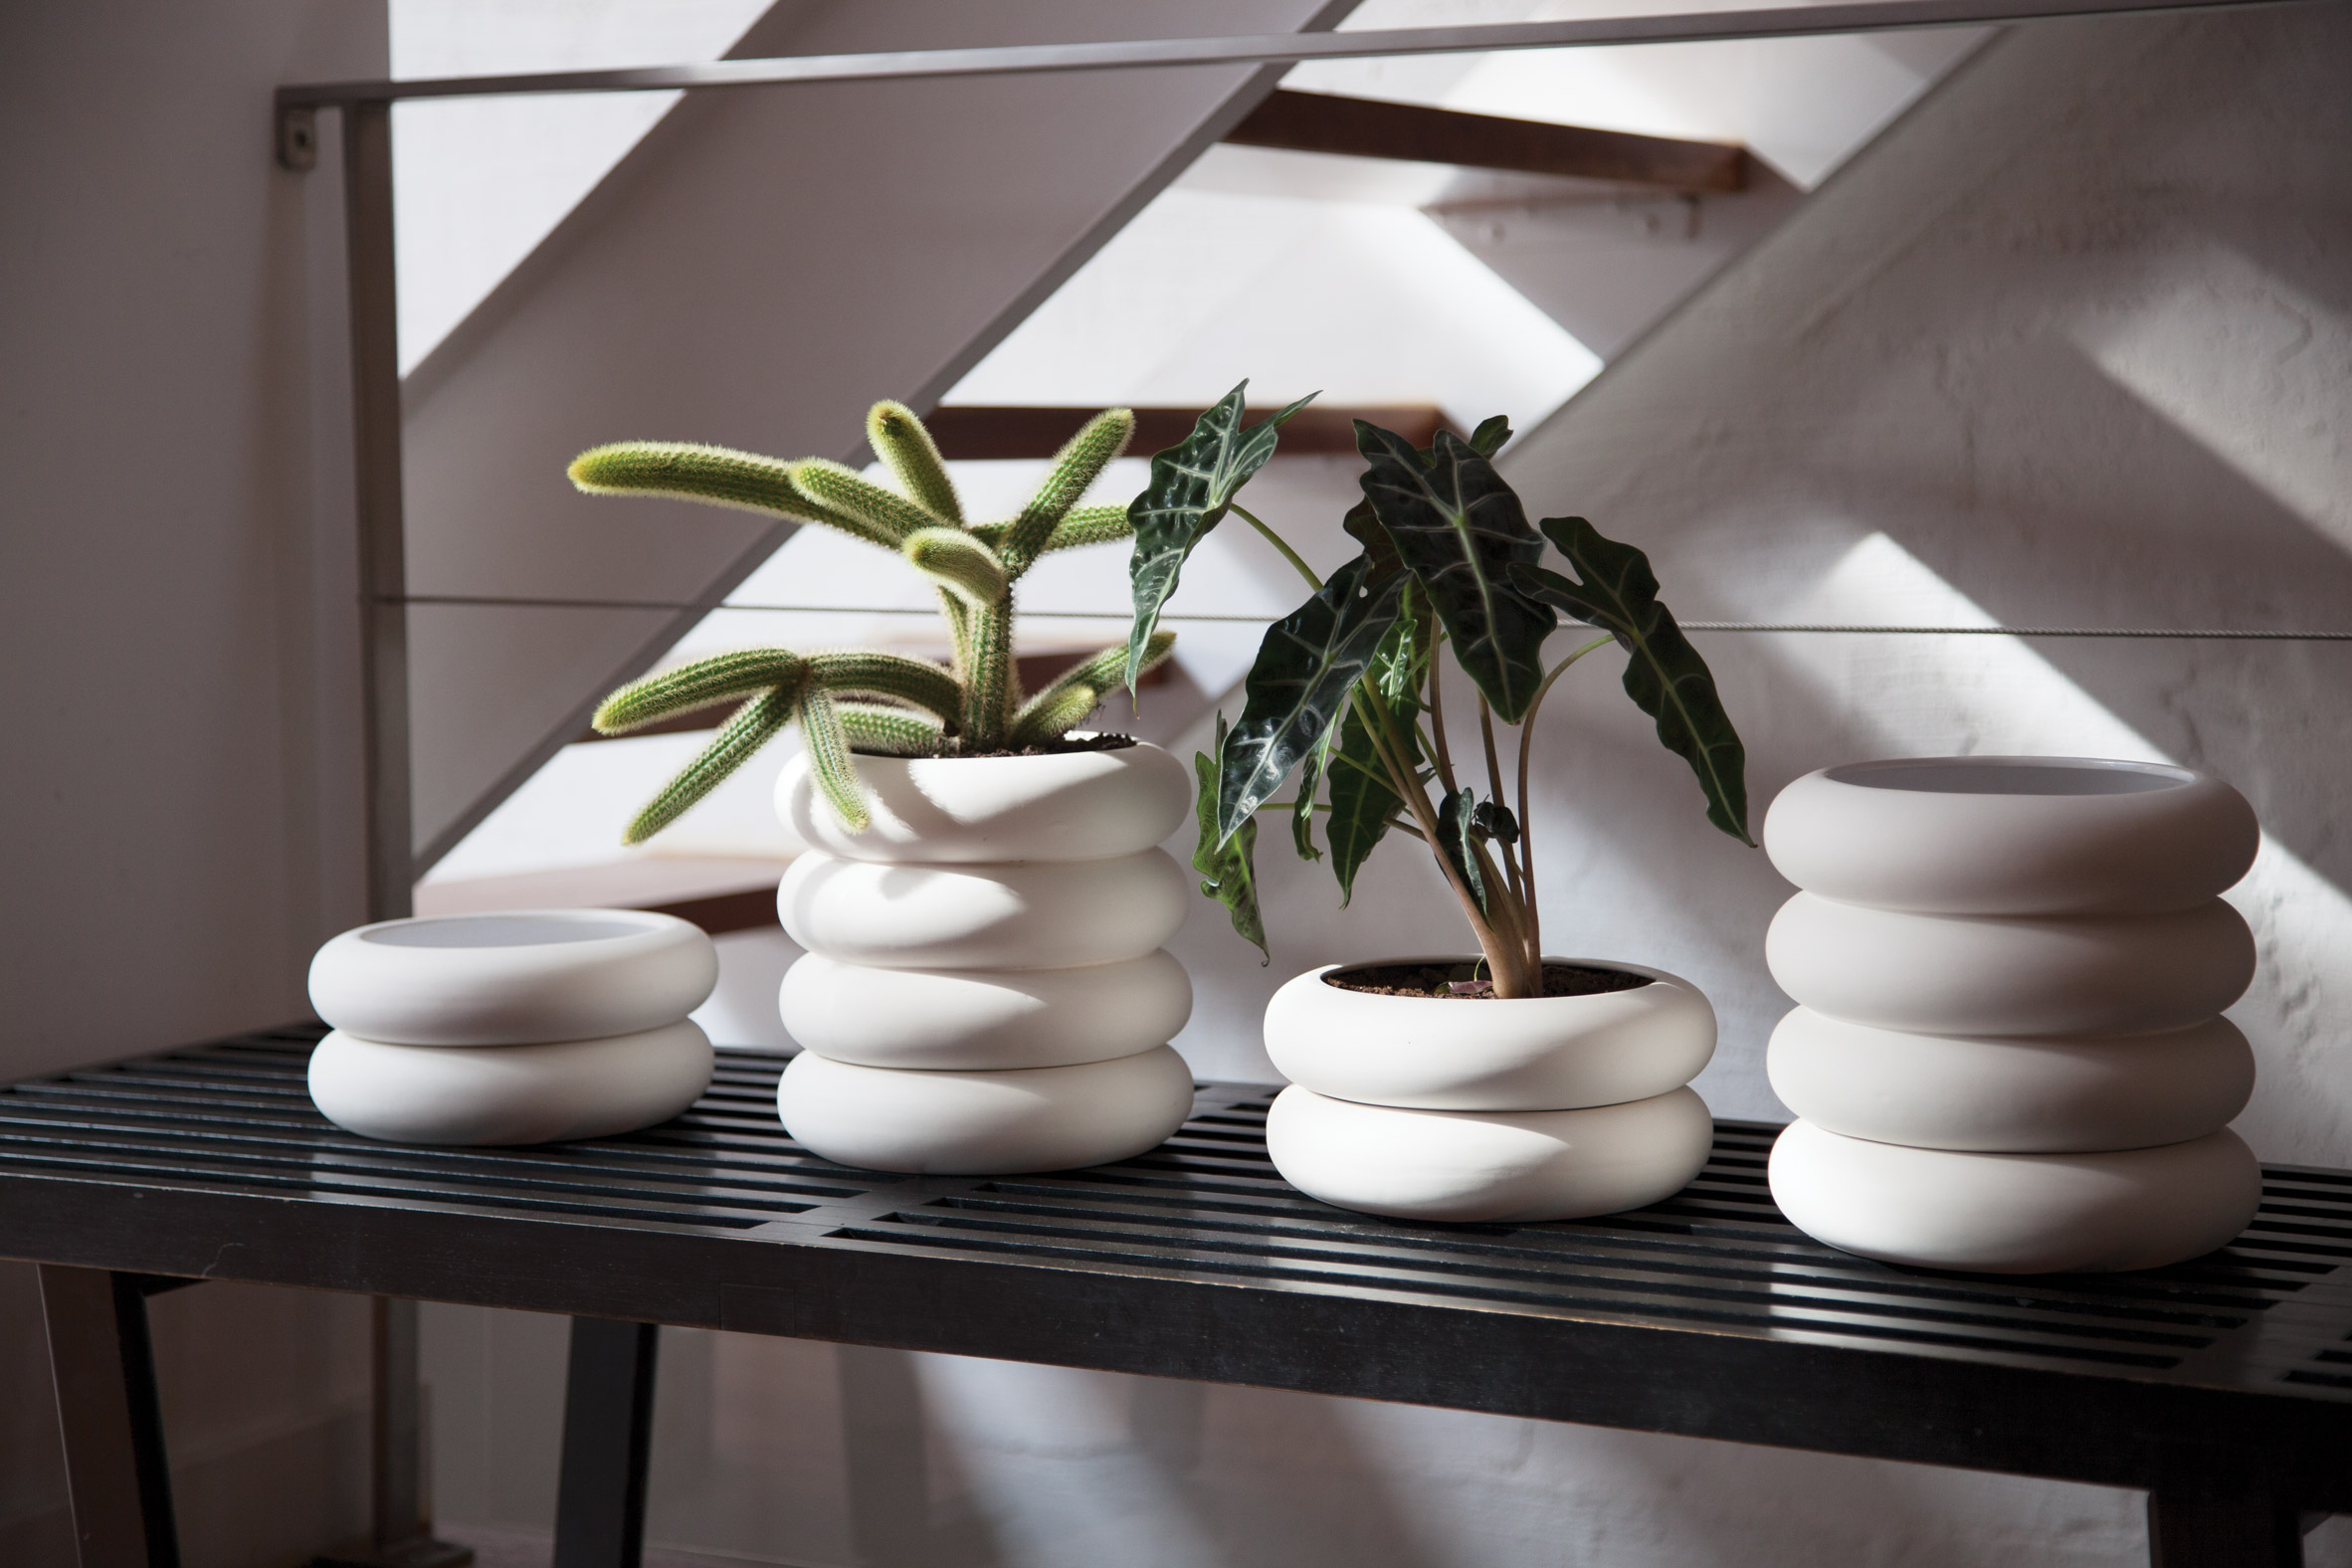 Studio Ayaskan's Growth plant pot expands with its occupant